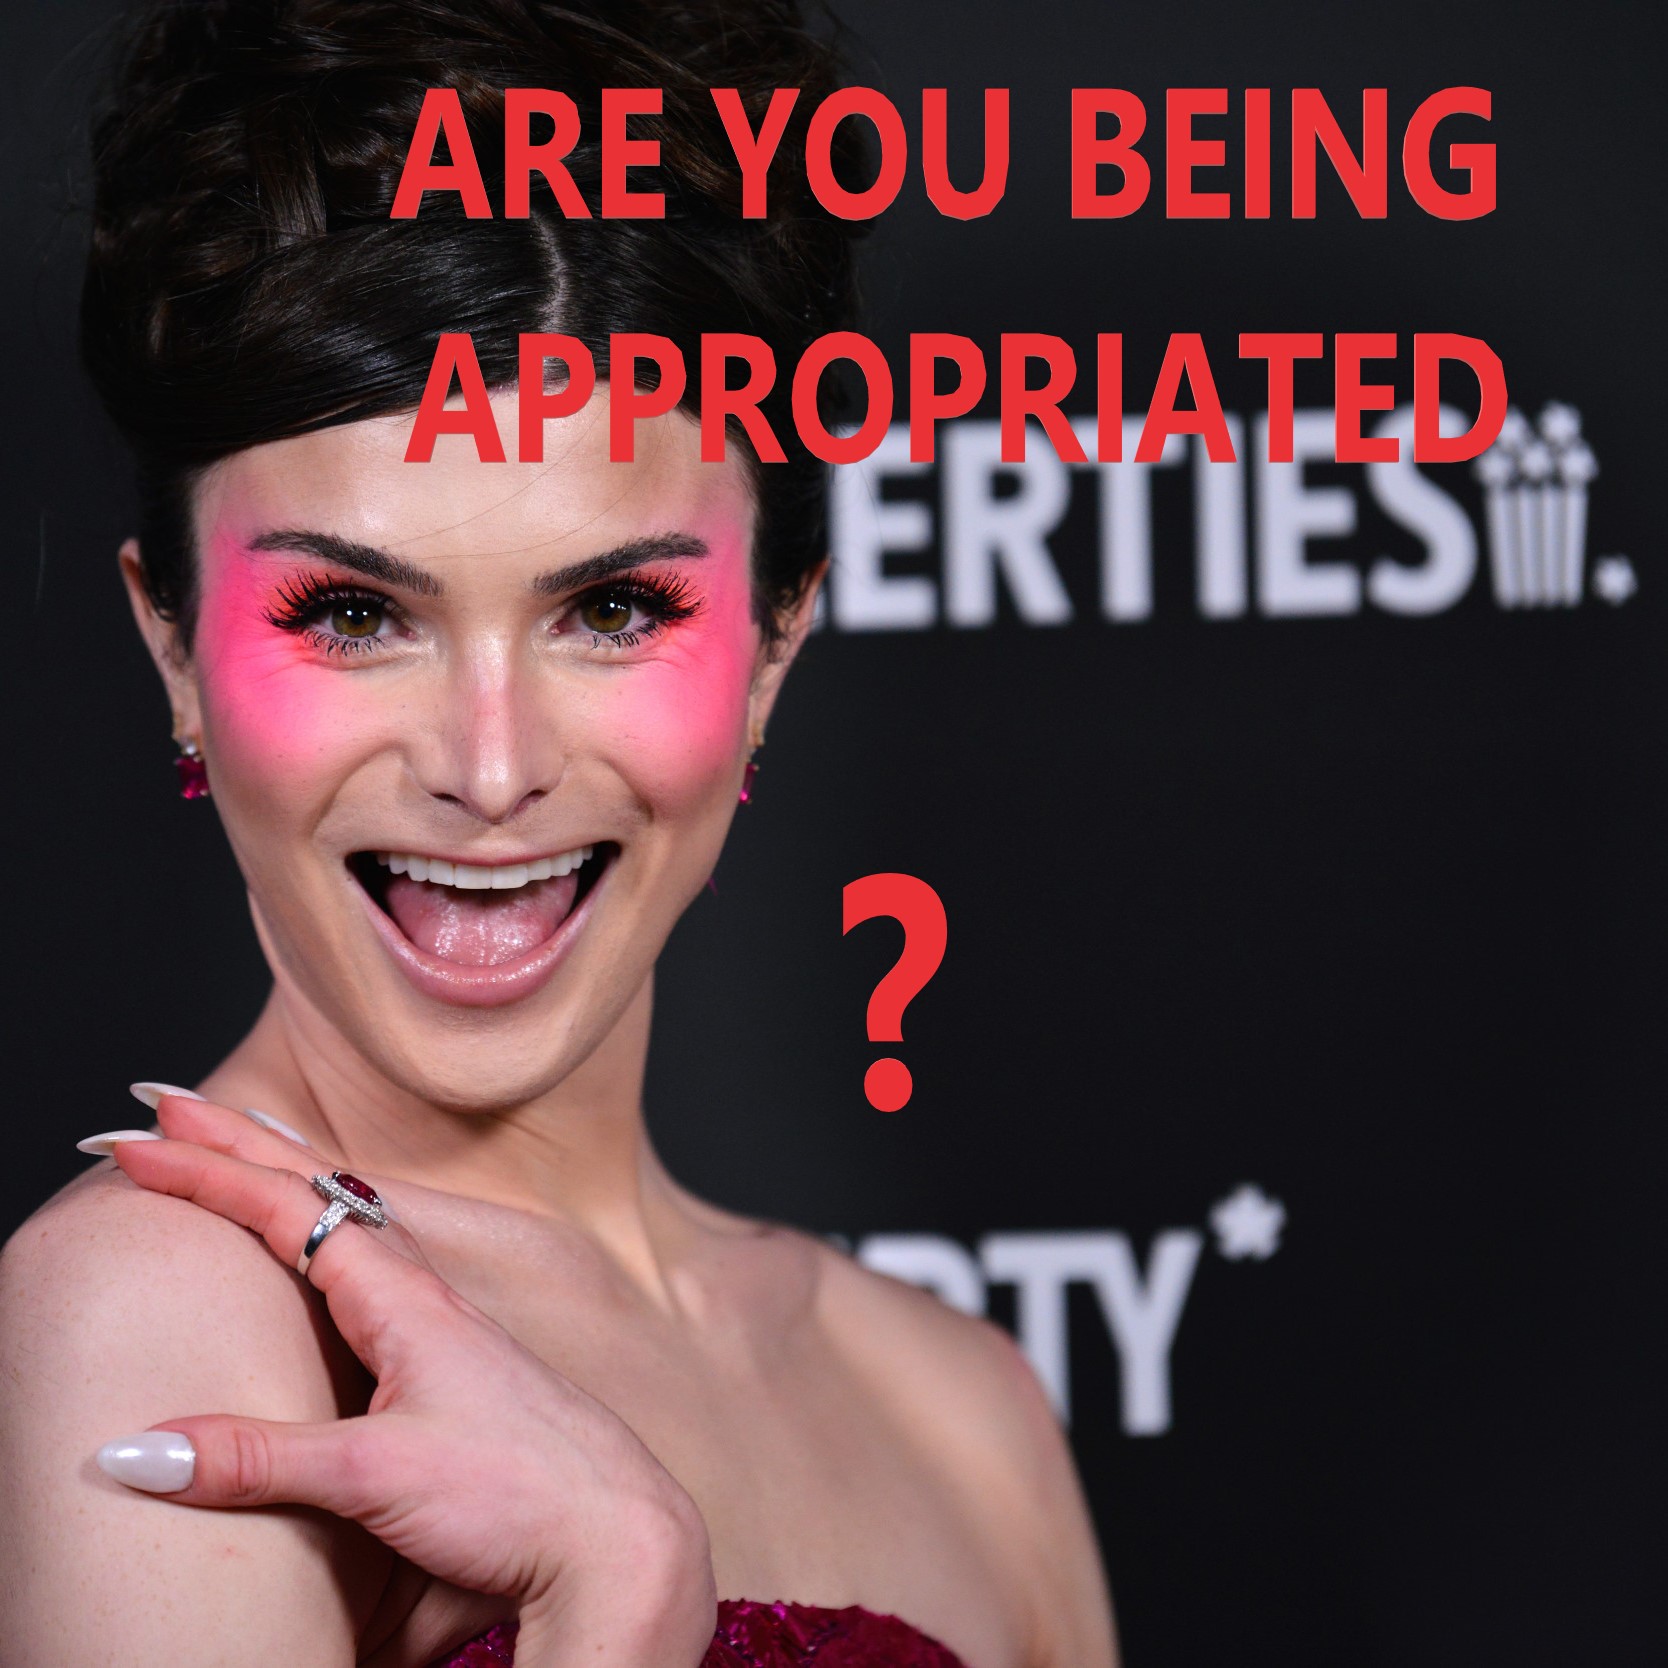 Are you being appropriated?